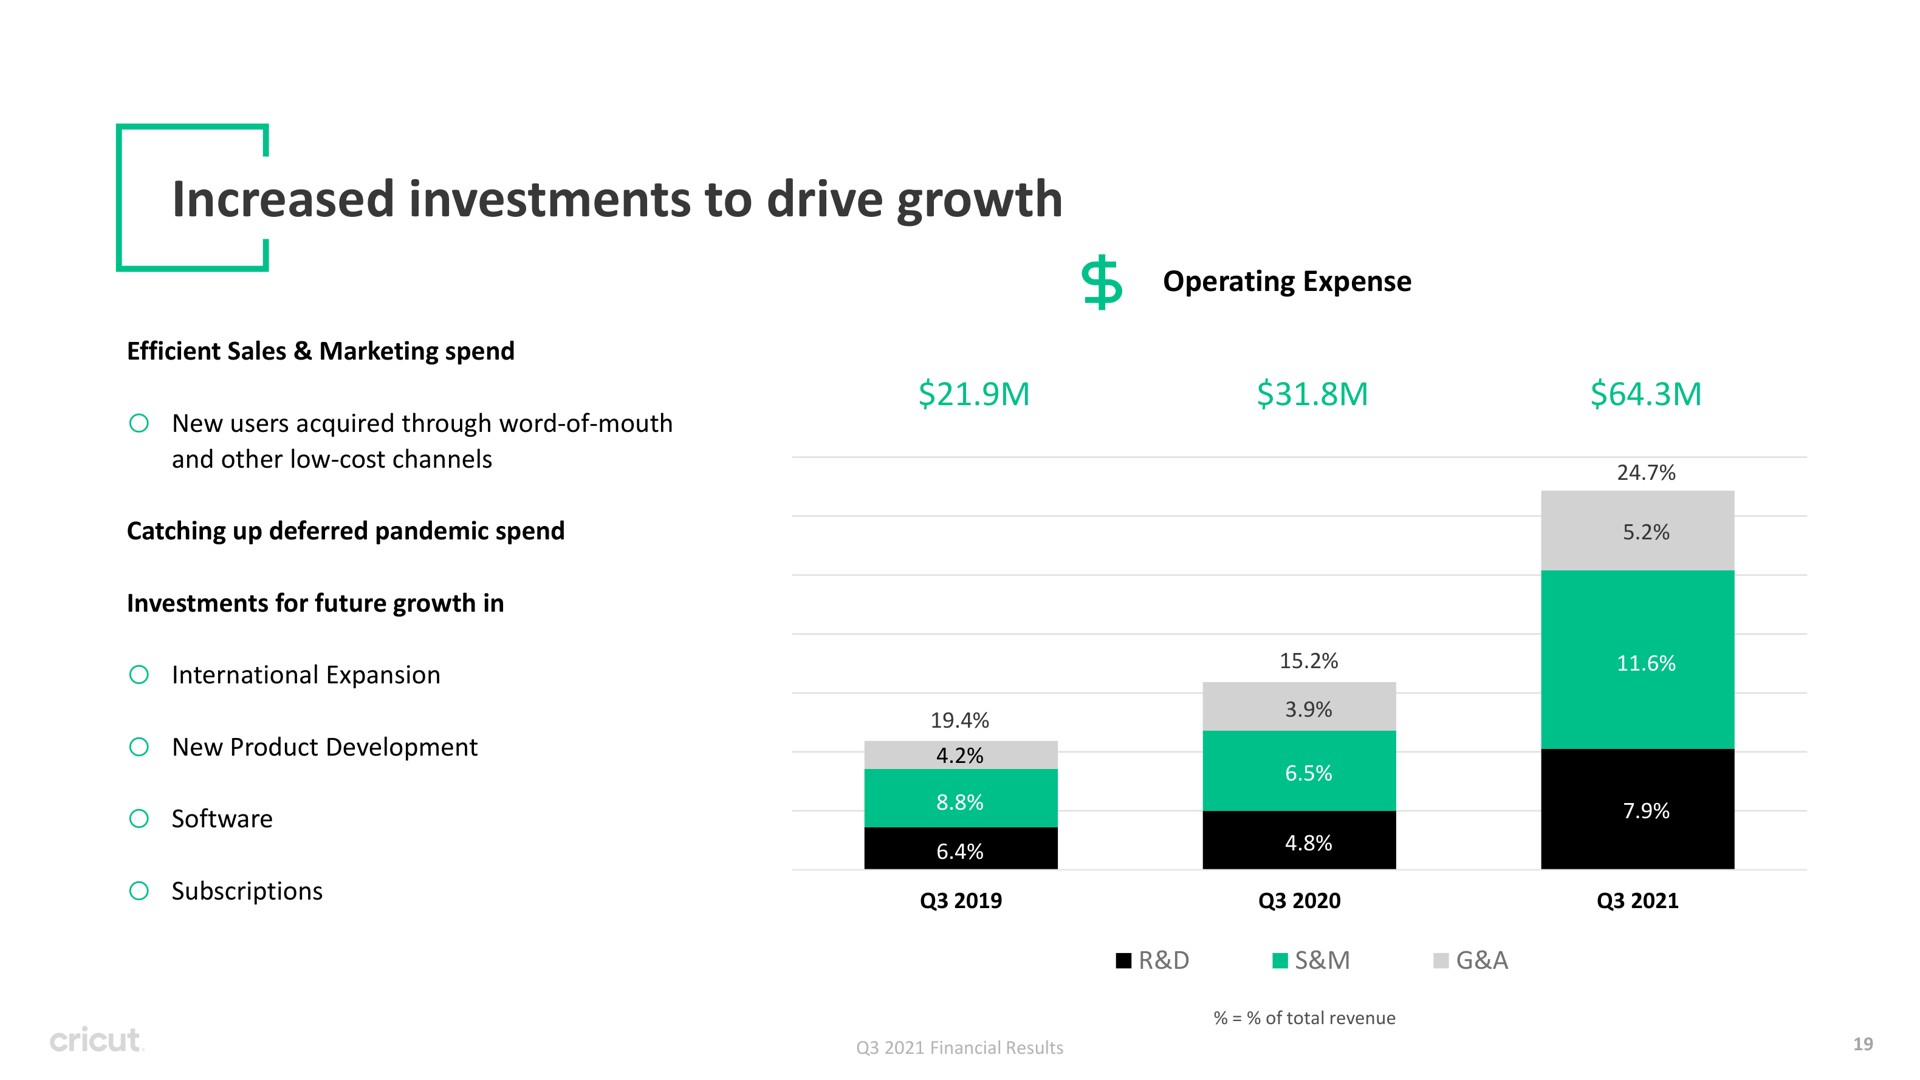 increased investments to drive growth | Circut